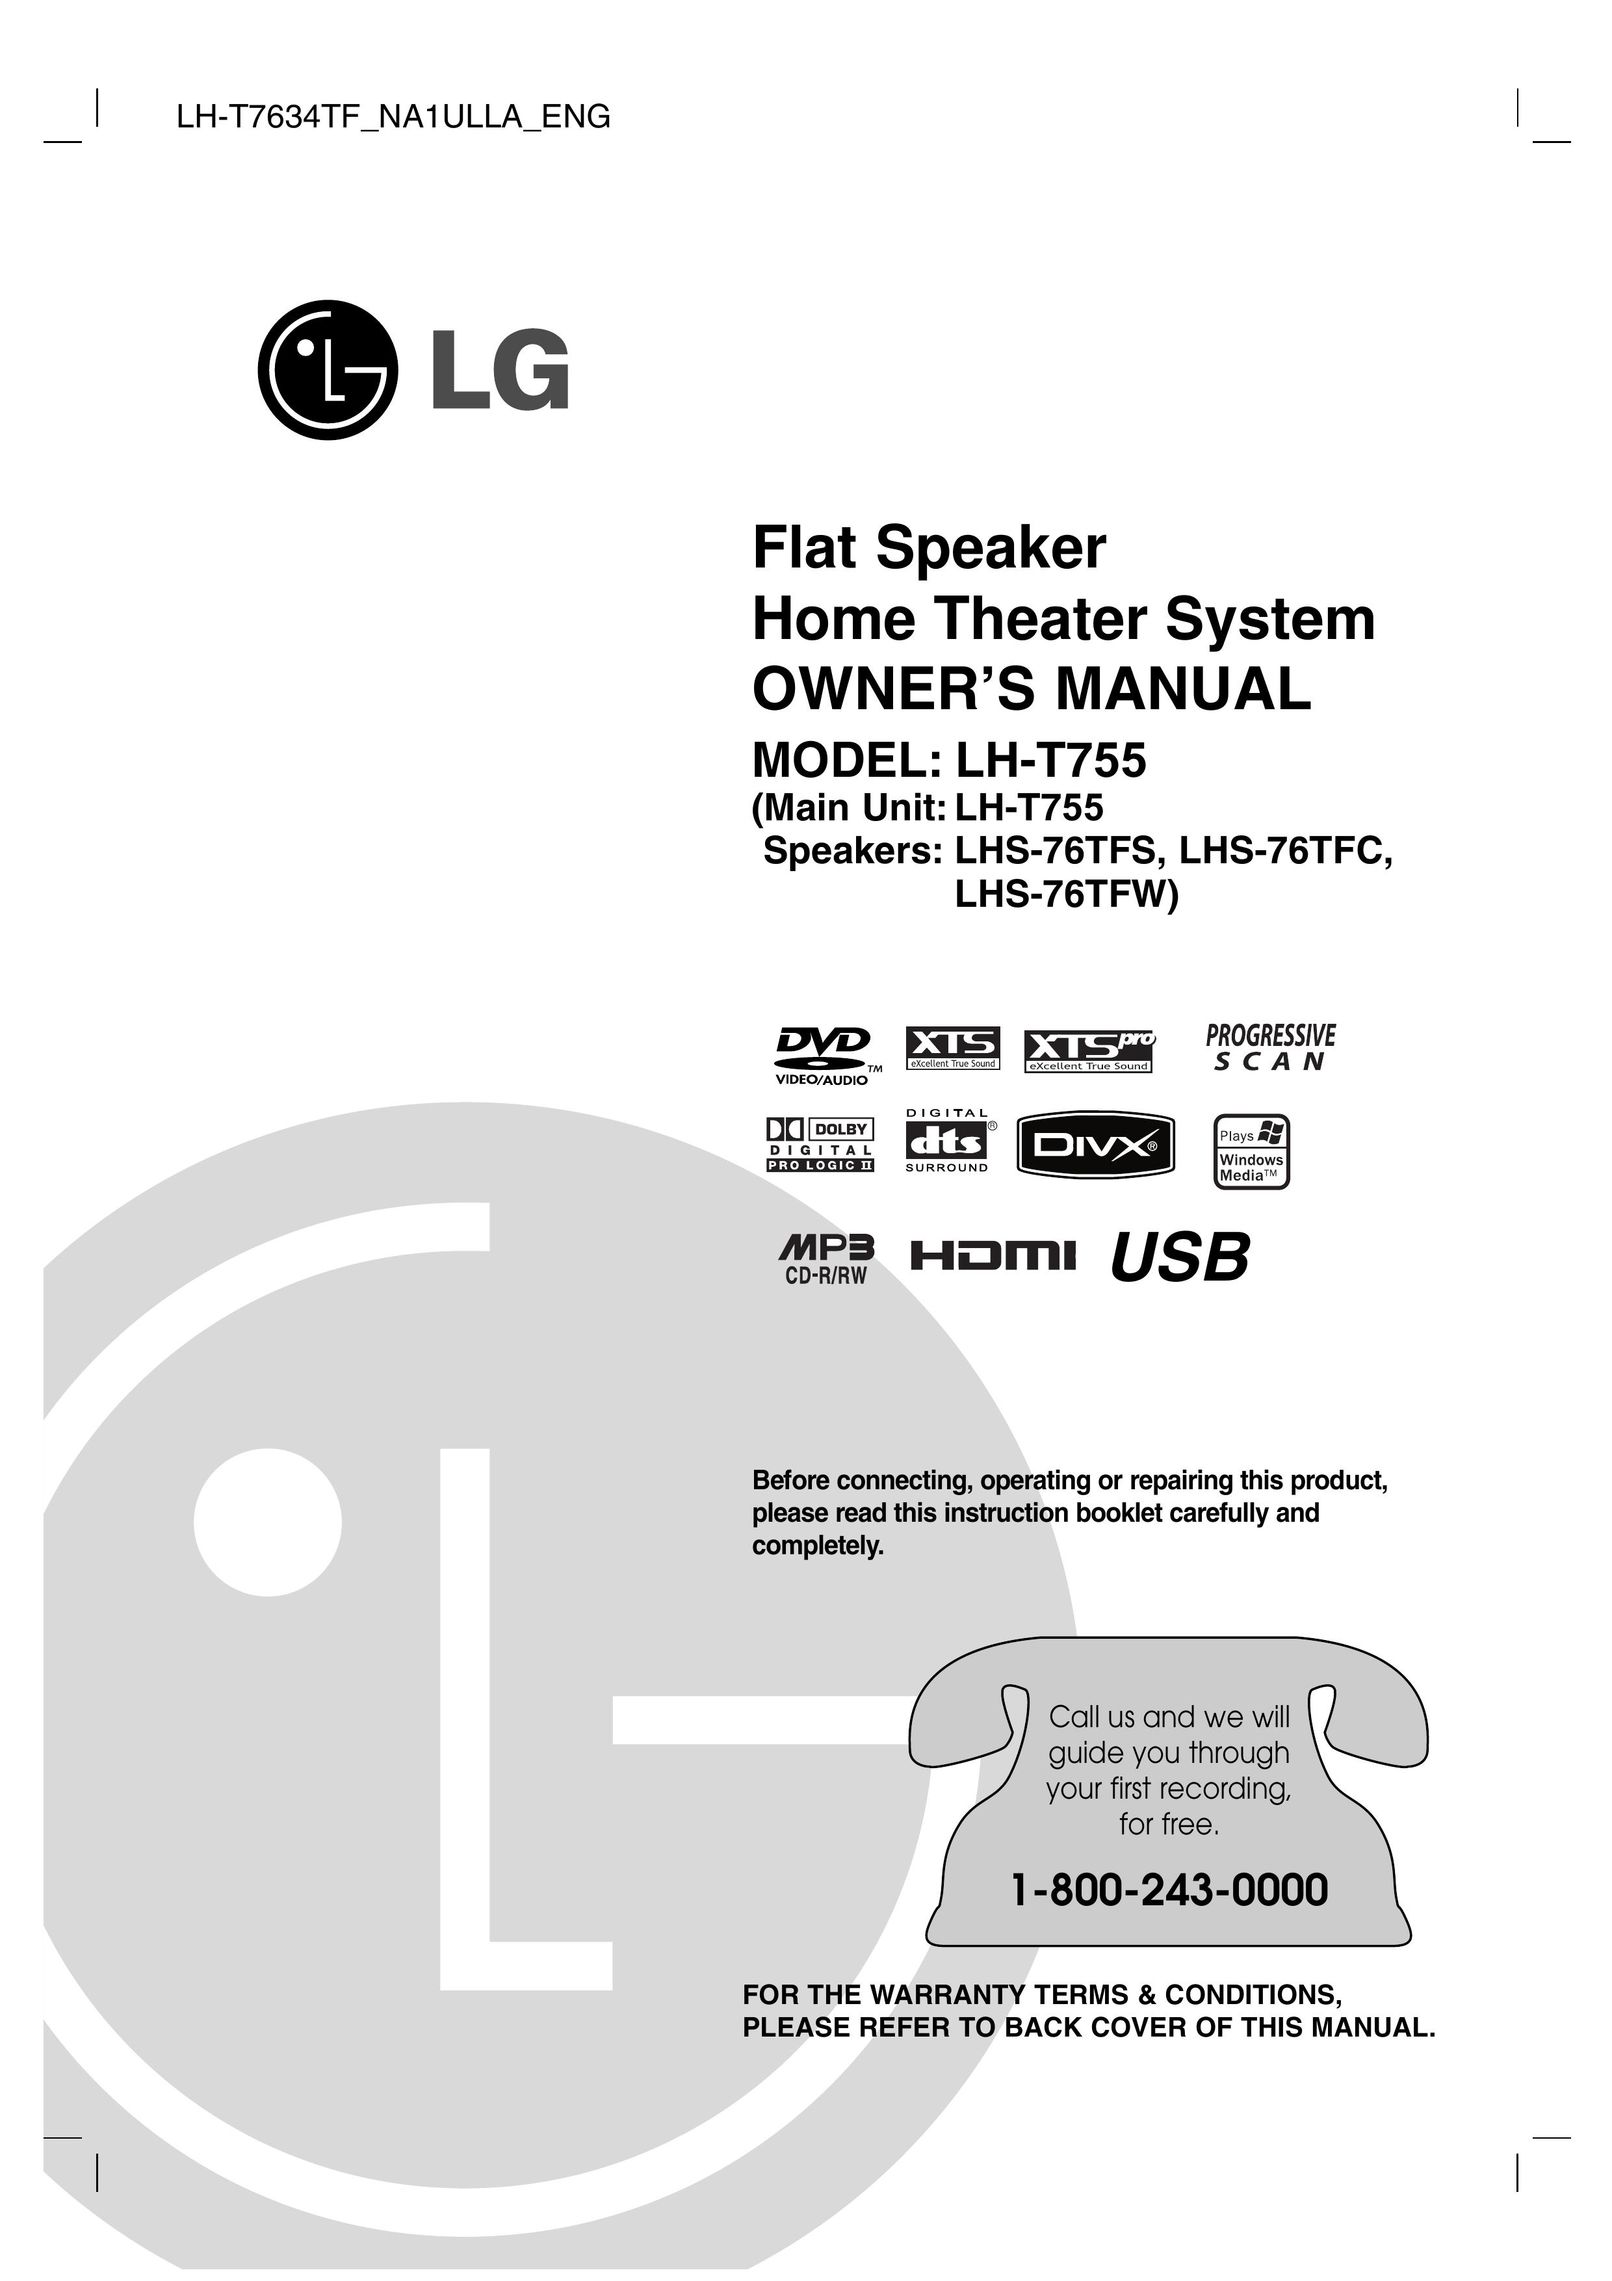 LG Electronics LHS-76TFS Home Theater System User Manual